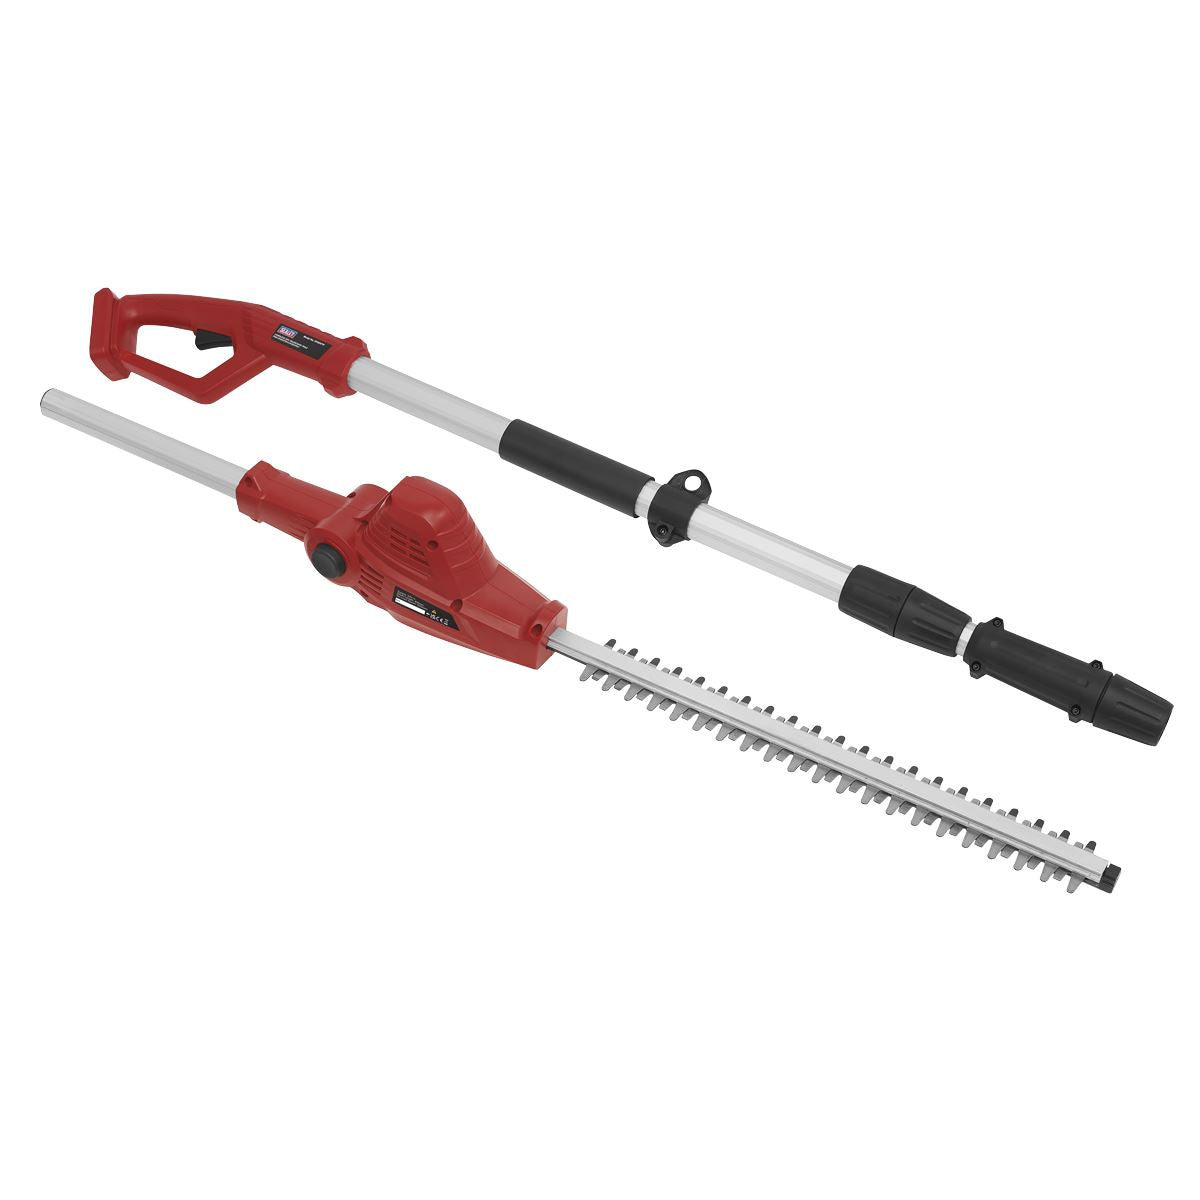 Sealey Pole Hedge Trimmer 20V 45cm SV20 Series Cordless Accessory